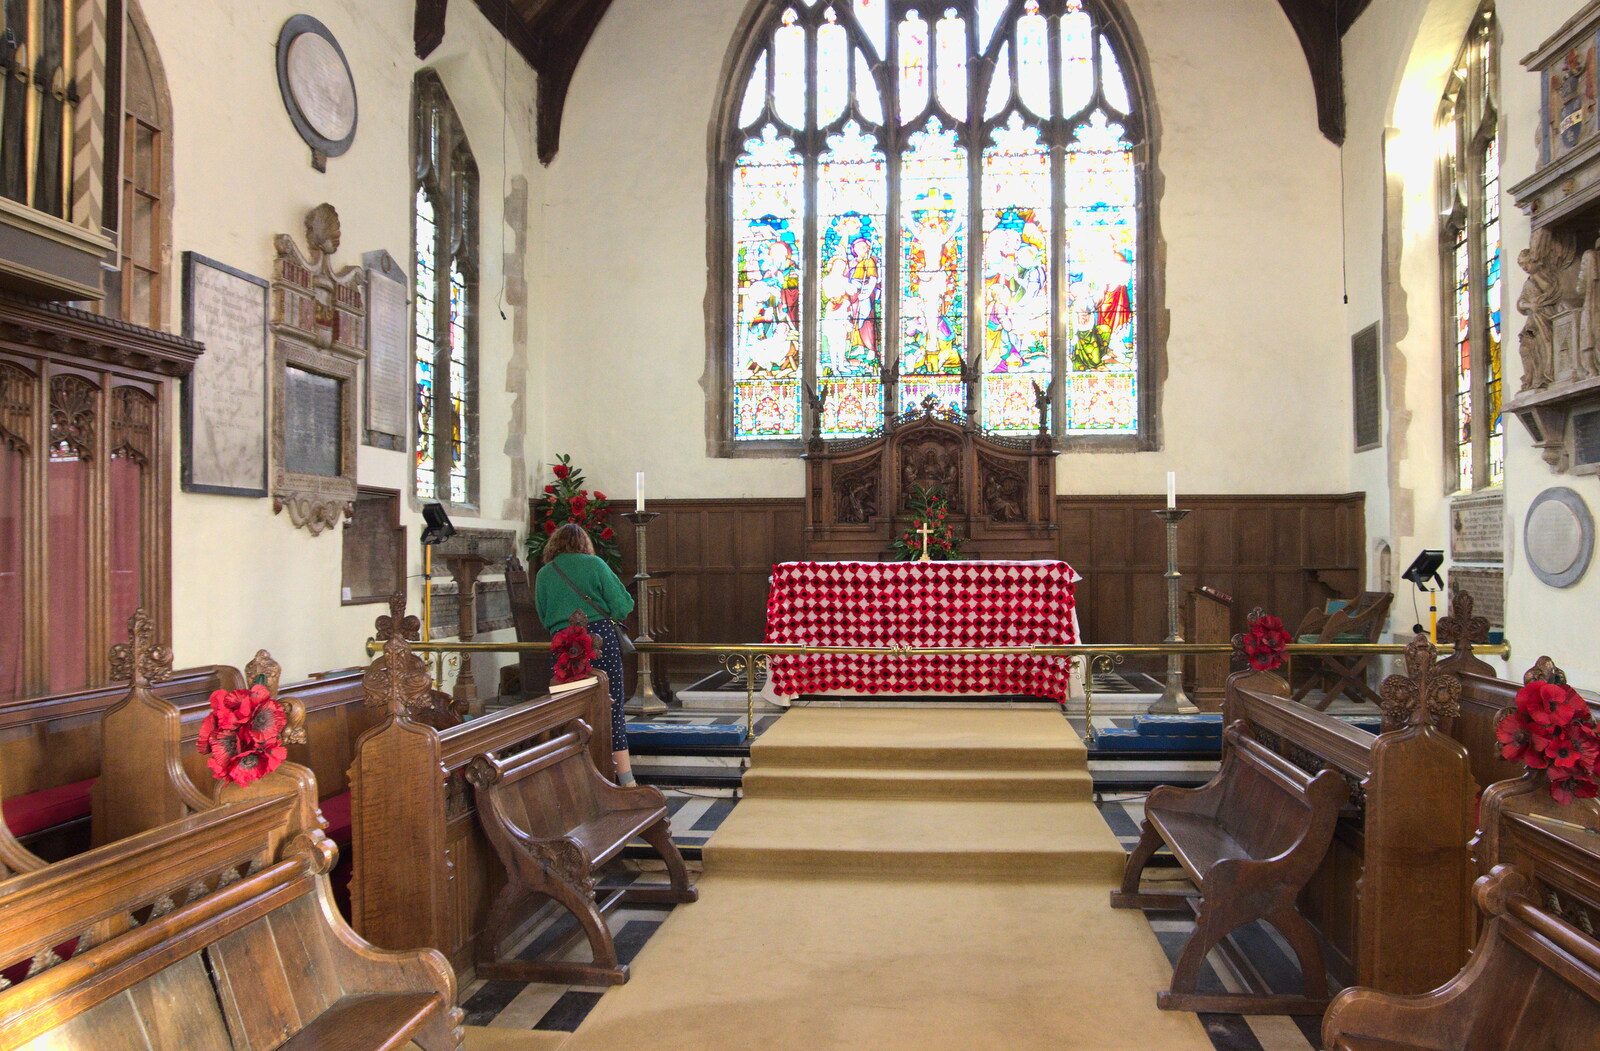 A Postcard from Flatford and Dedham, Suffolk and Essex, 9th November 2022: Isobel pokes around near the altar